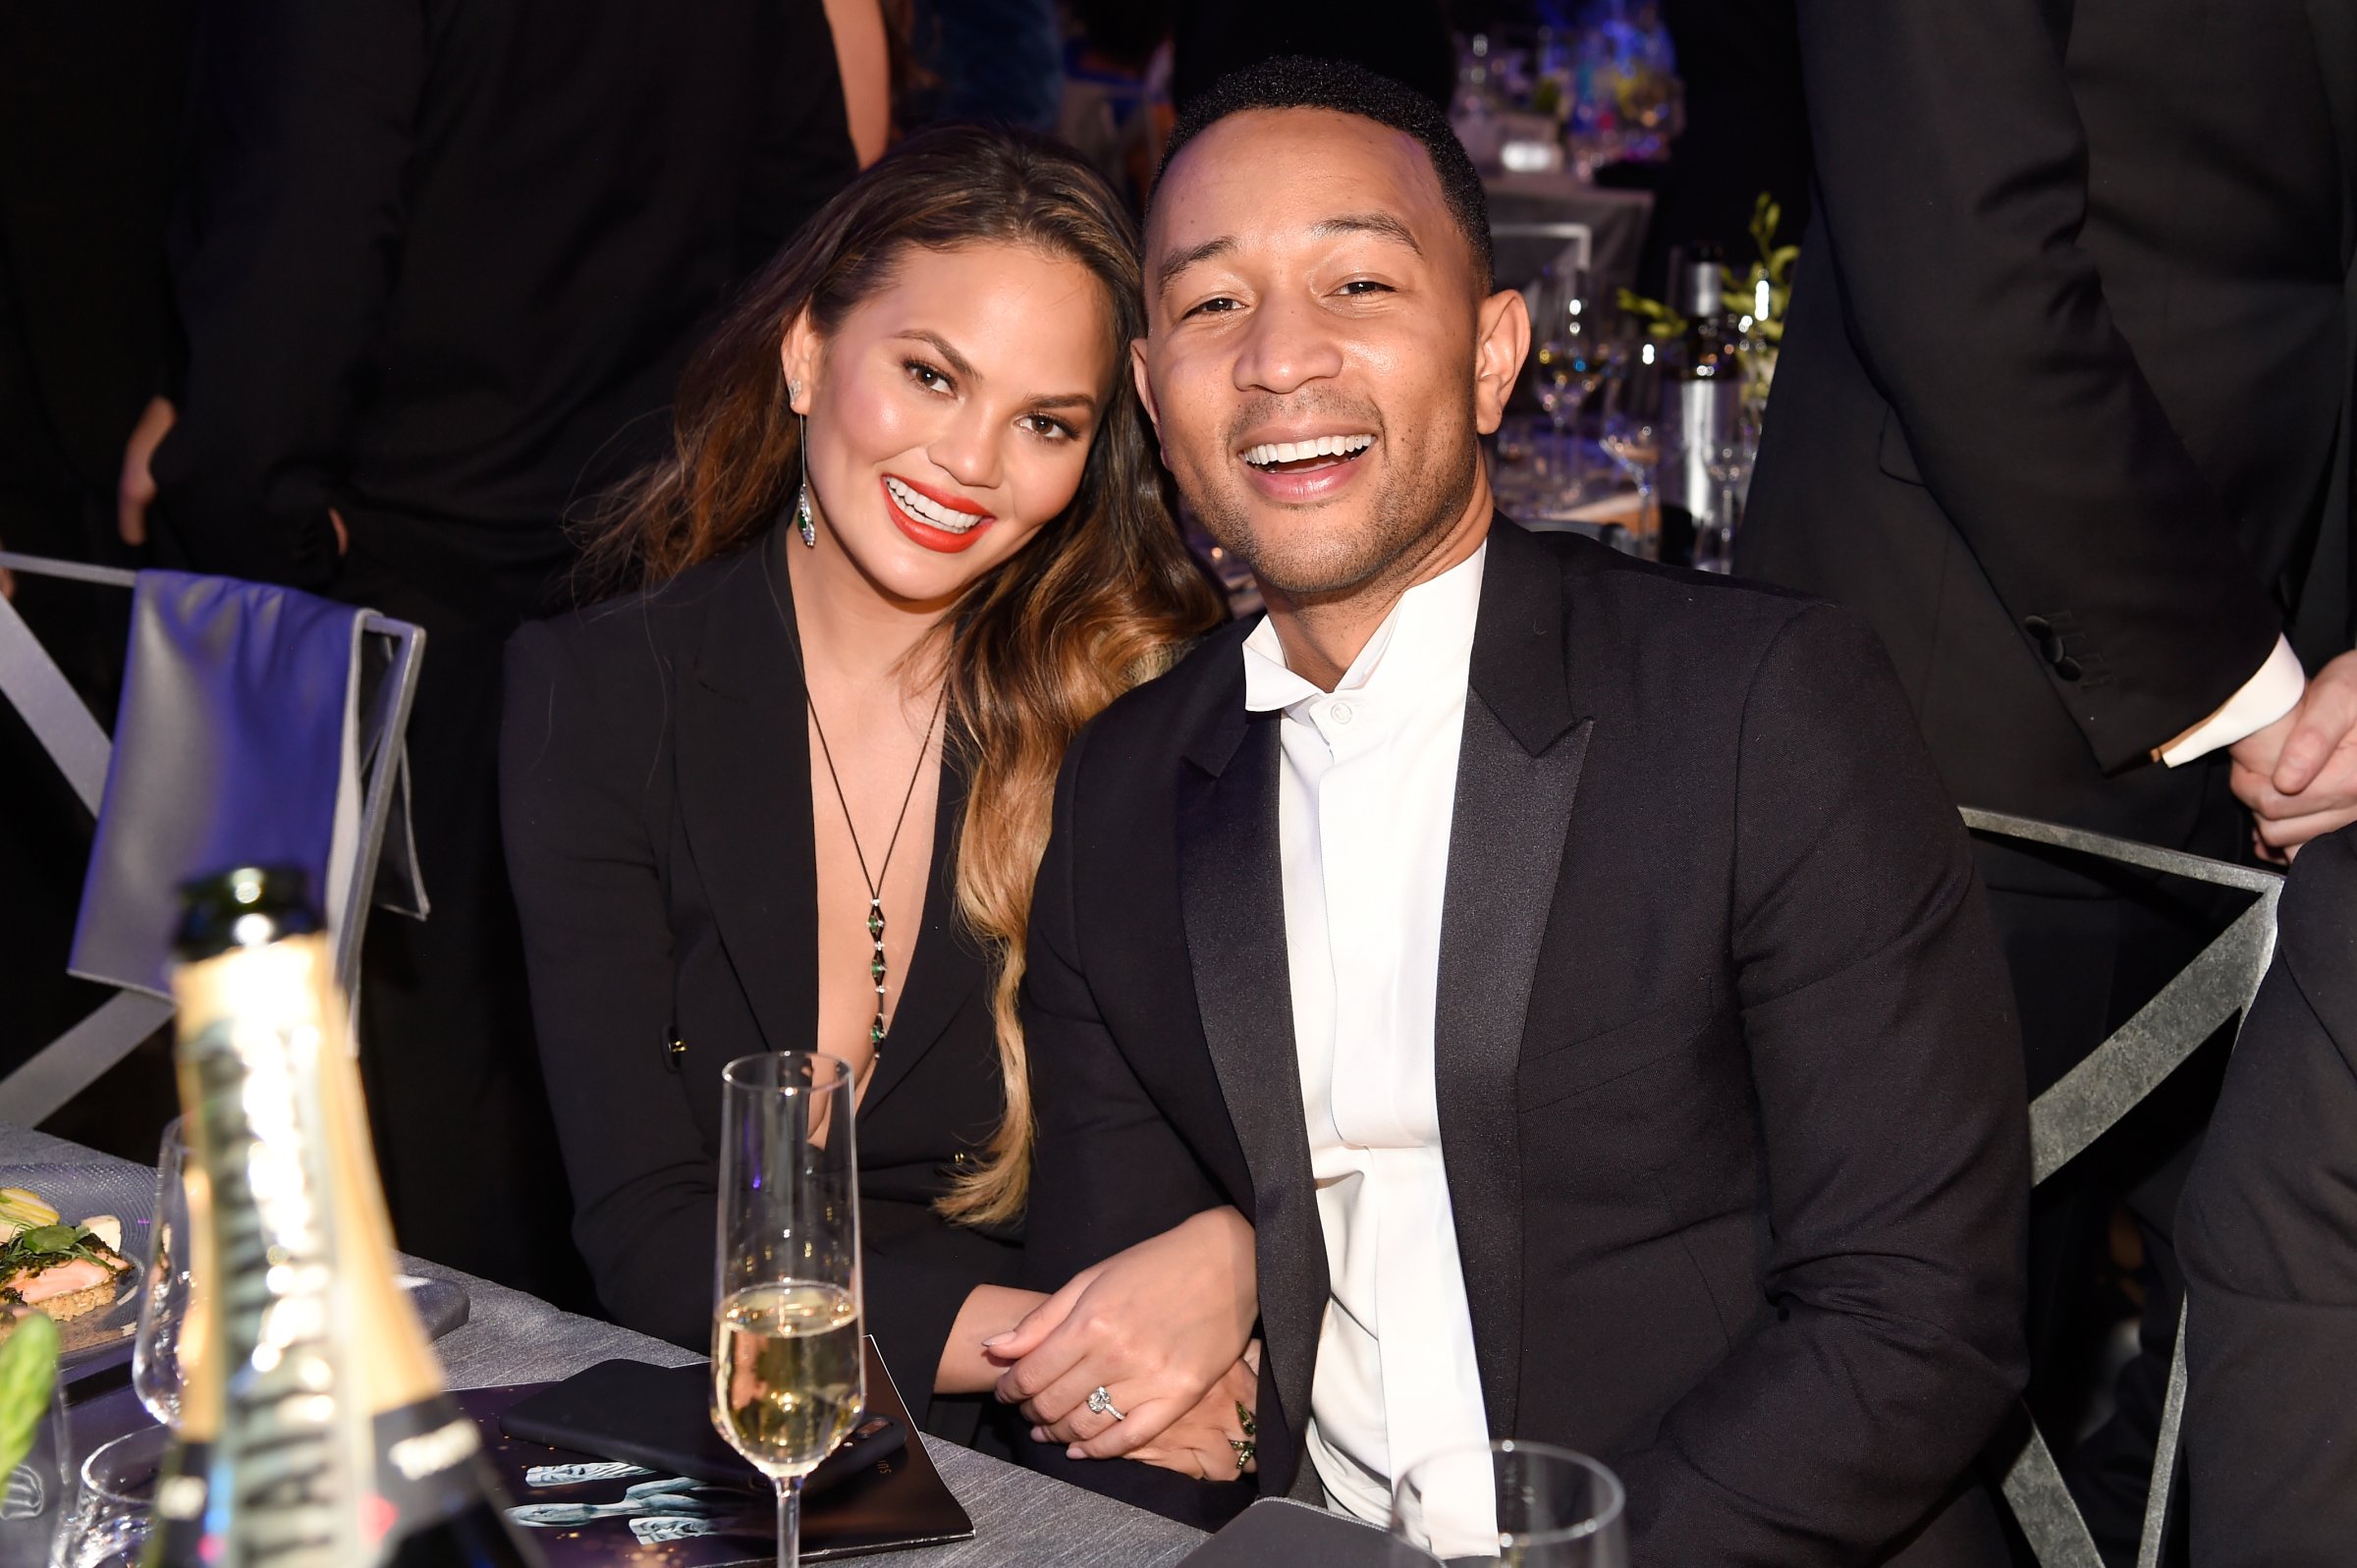 Chrissy Teigen (L) and artist John Legend during The 23rd Annual Screen Actors Guild Awards at The Shrine Auditorium on January 29, 2017 in Los Angeles, California.